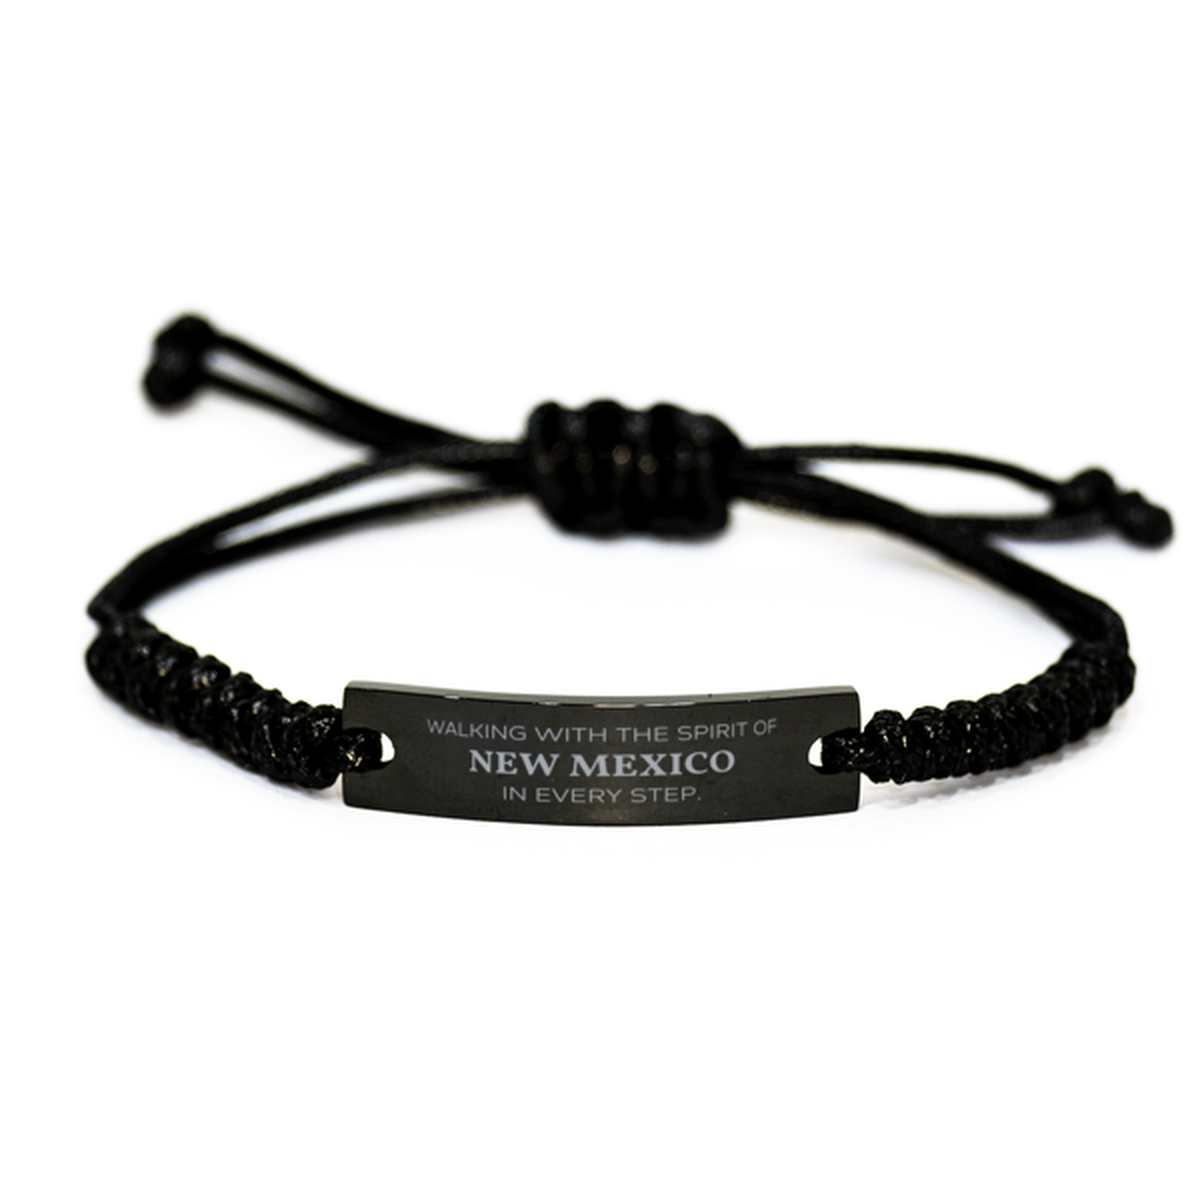 New Mexico Gifts, Walking with the spirit, Love New Mexico Birthday Christmas Black Rope Bracelet For New Mexico People, Men, Women, Friends